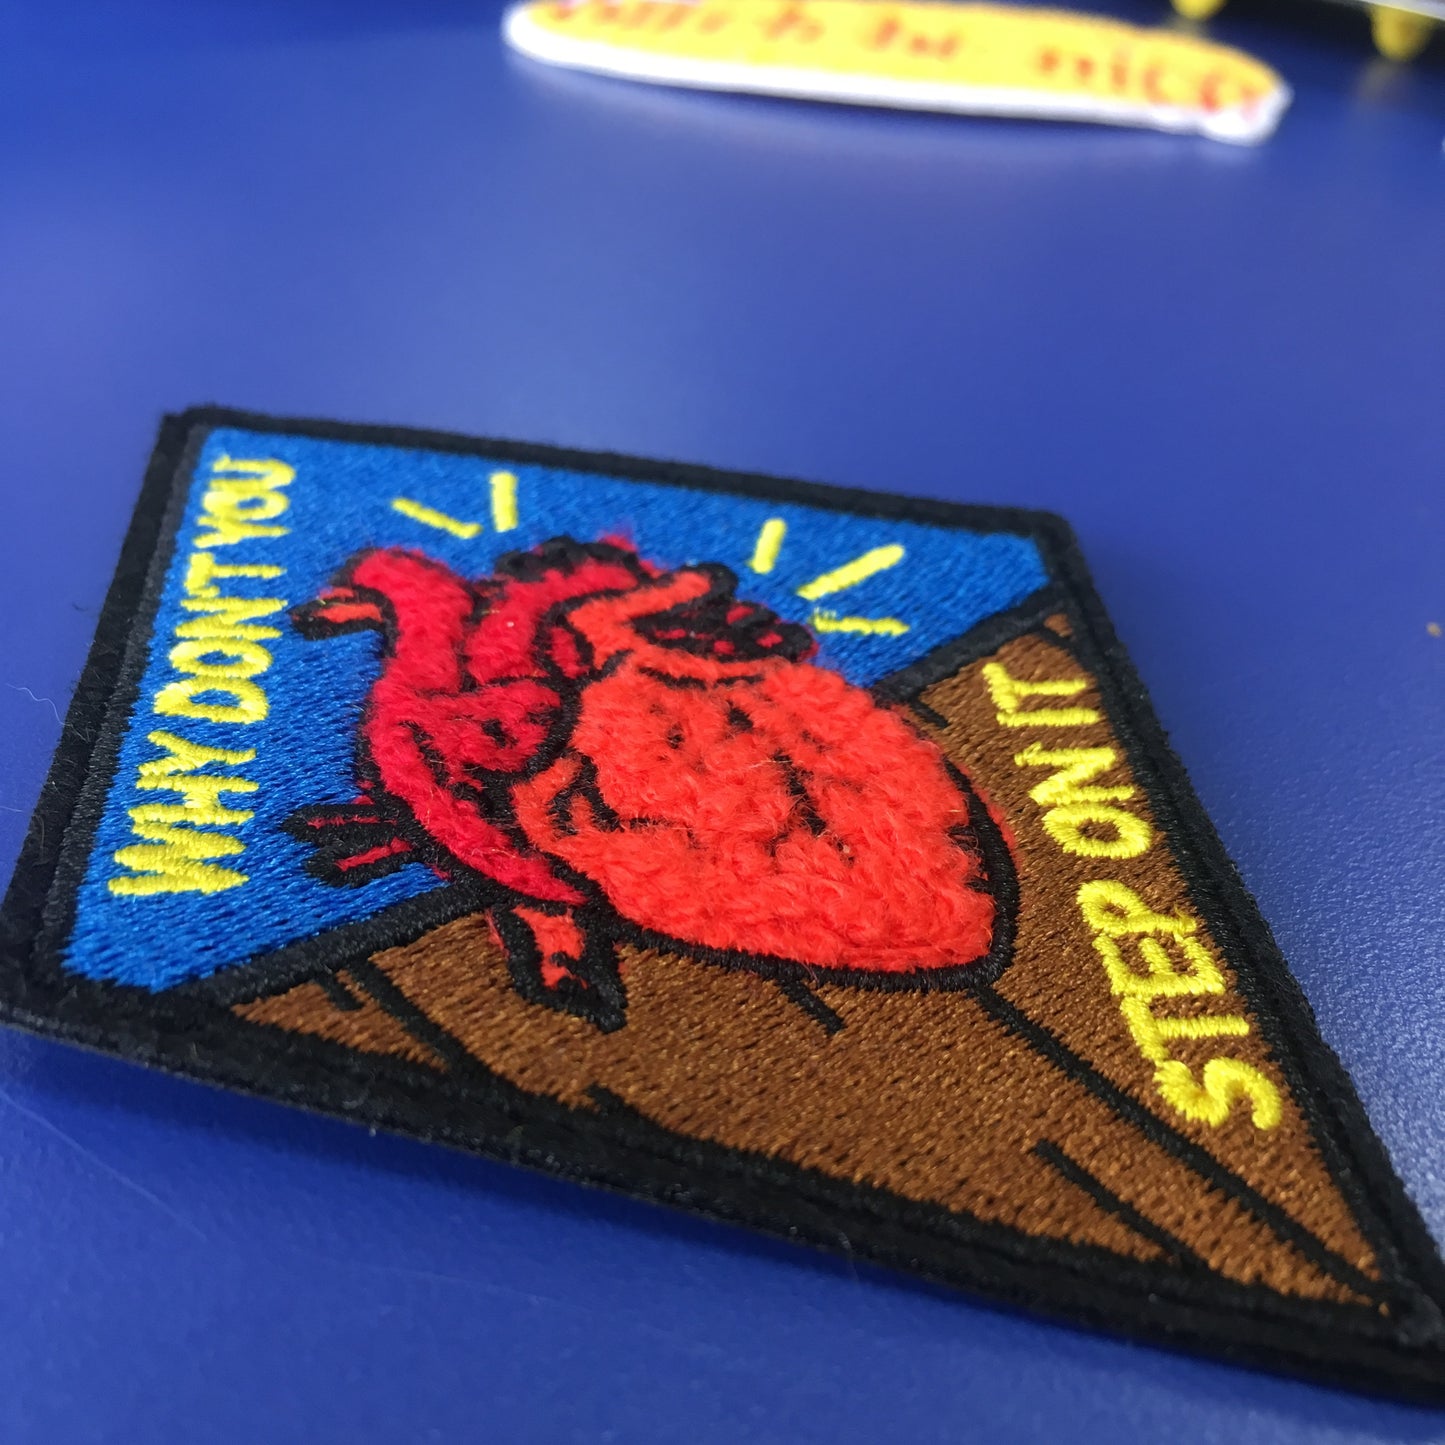 Heart Is On The Floor - Patch - Discontinued Design, Donations to Sexual Assault Survivors